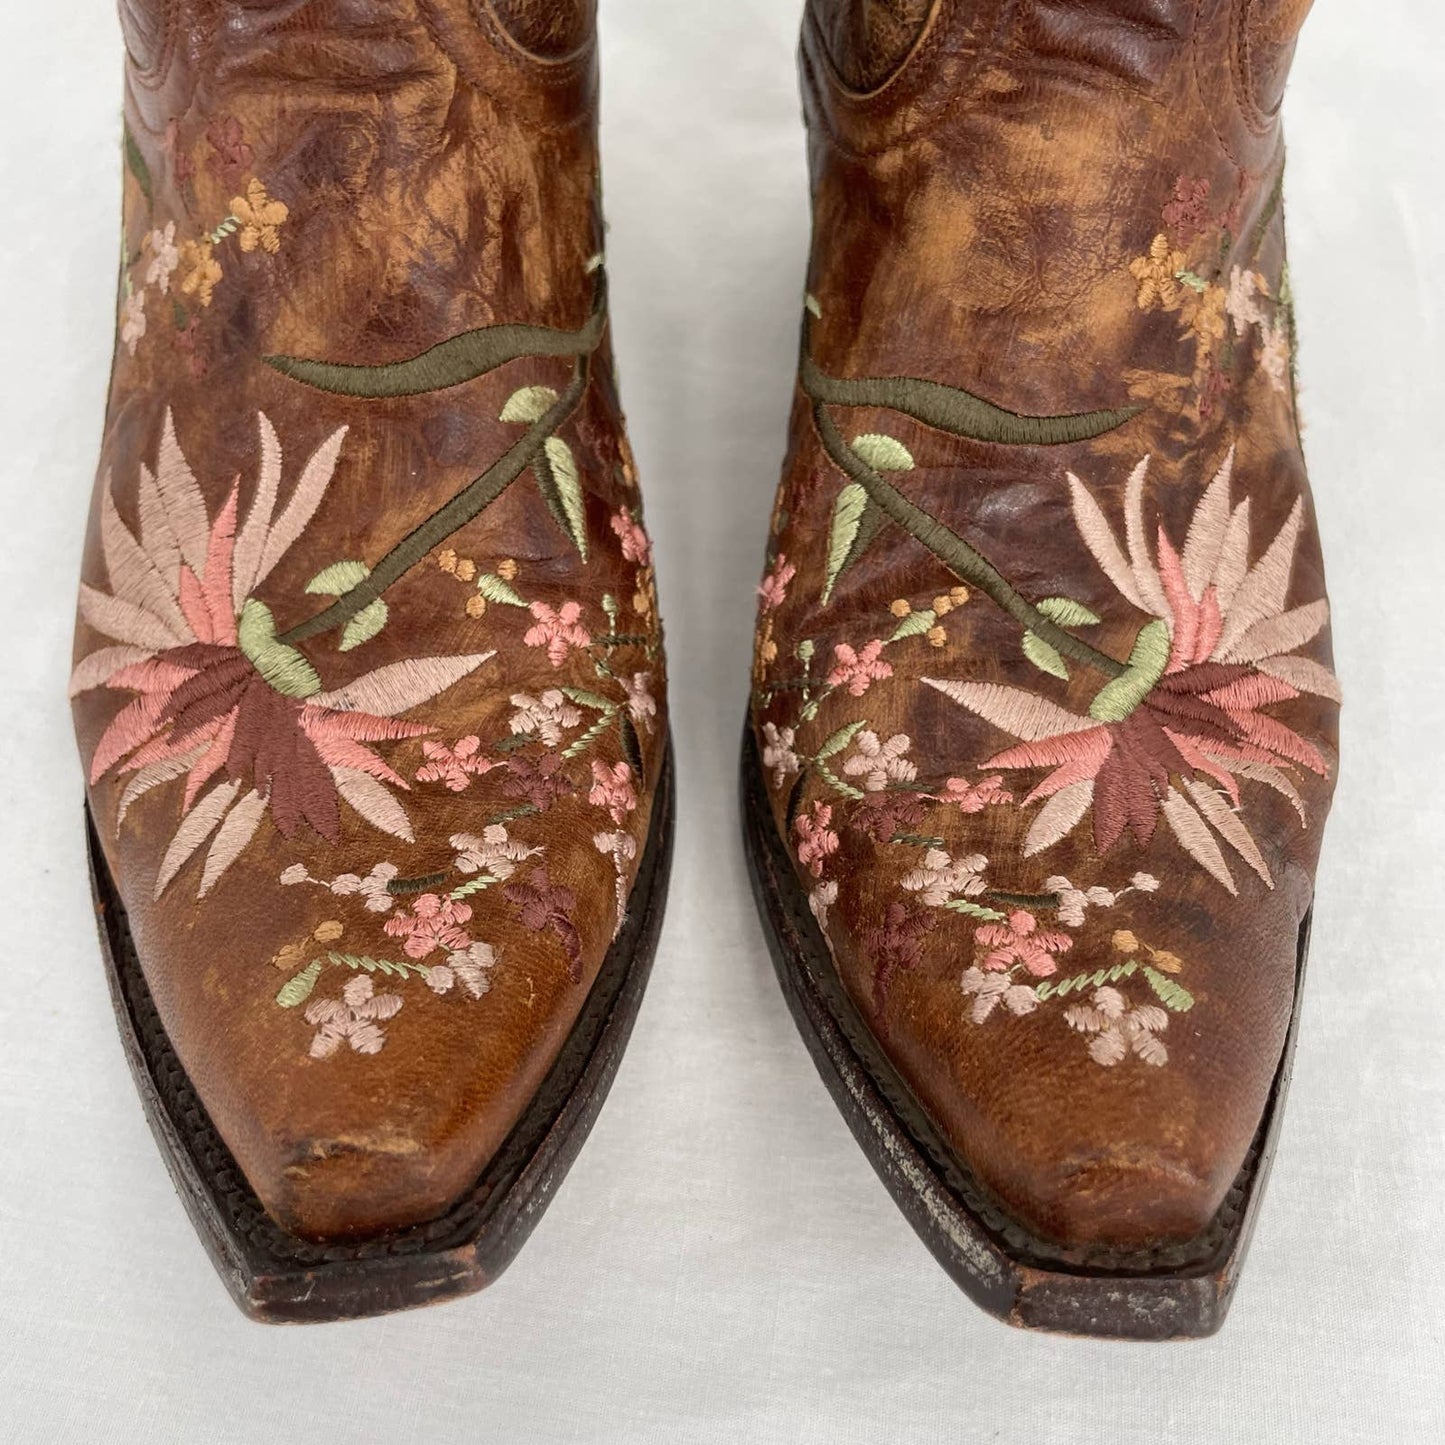 Old Gringo Ellie Boot Low Western Cowboy Cowgirl Floral Leather Brass Brown Size 8.5